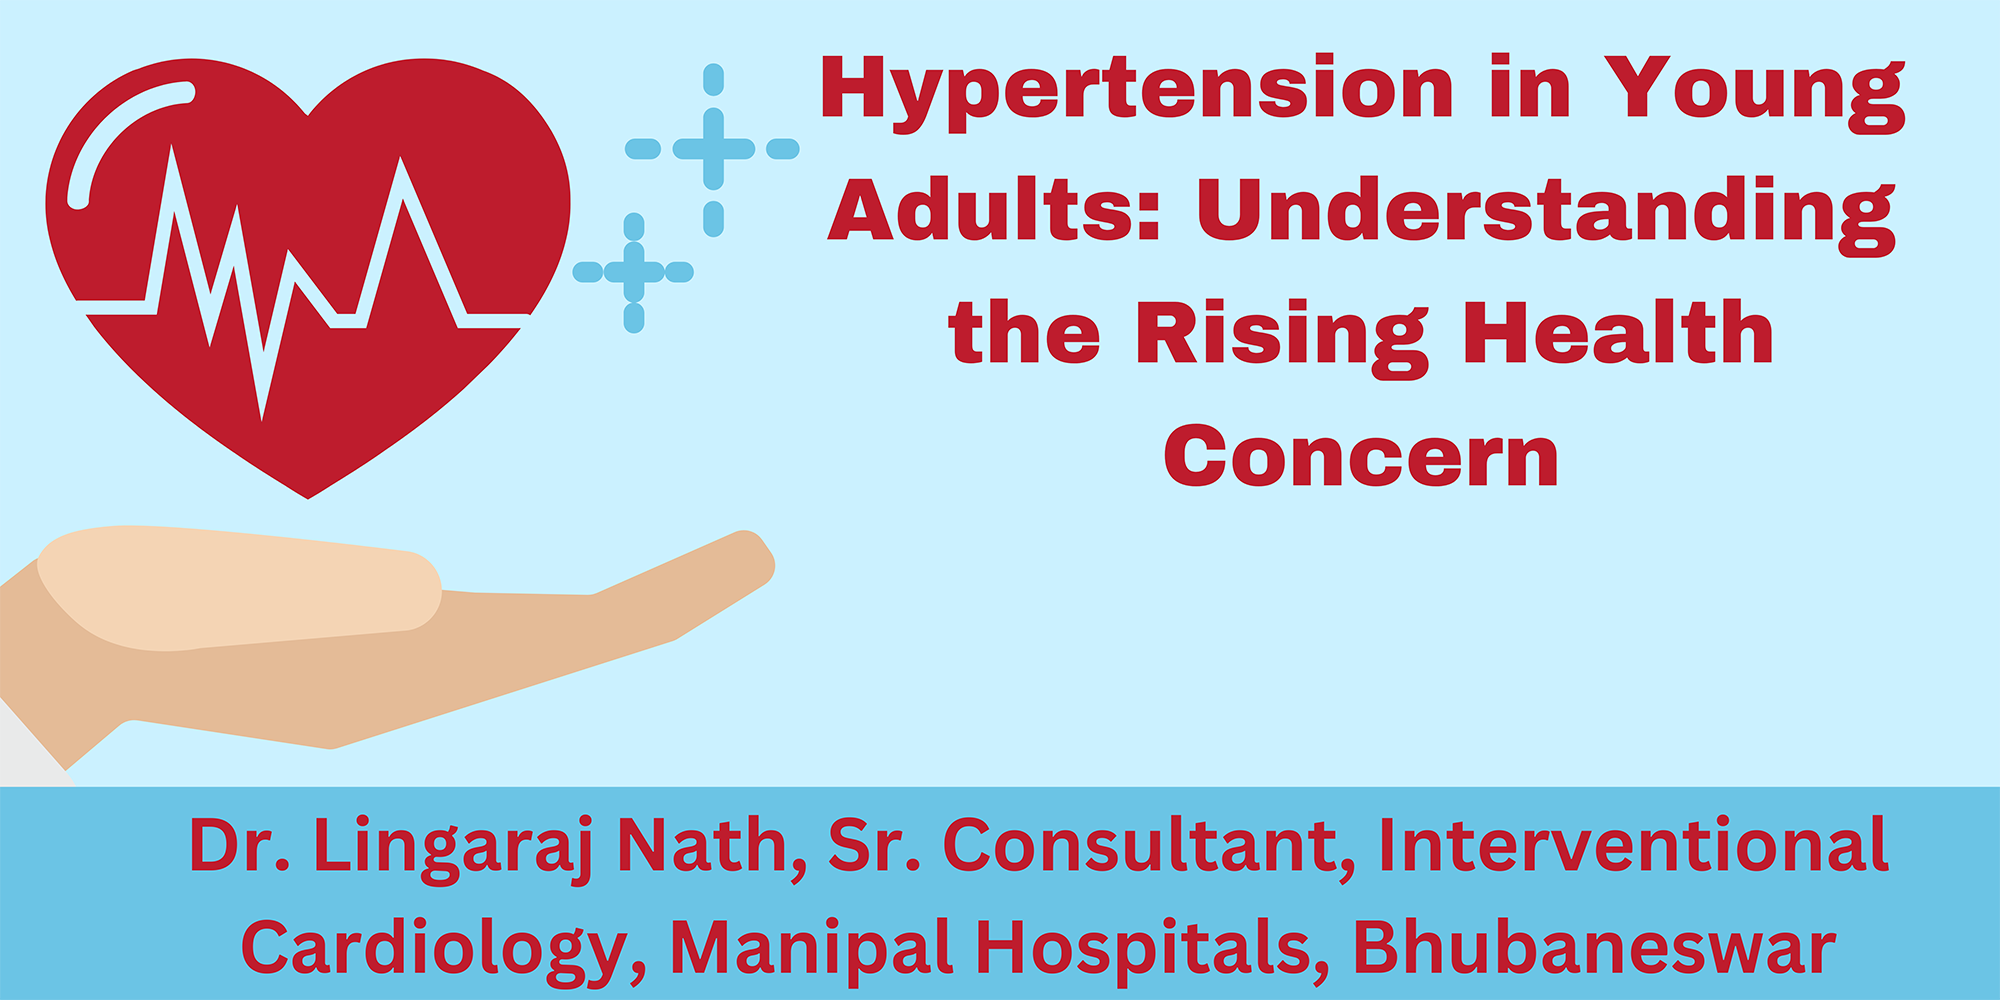 Hypertension in Young Adults: Understanding the Rising Health Concern